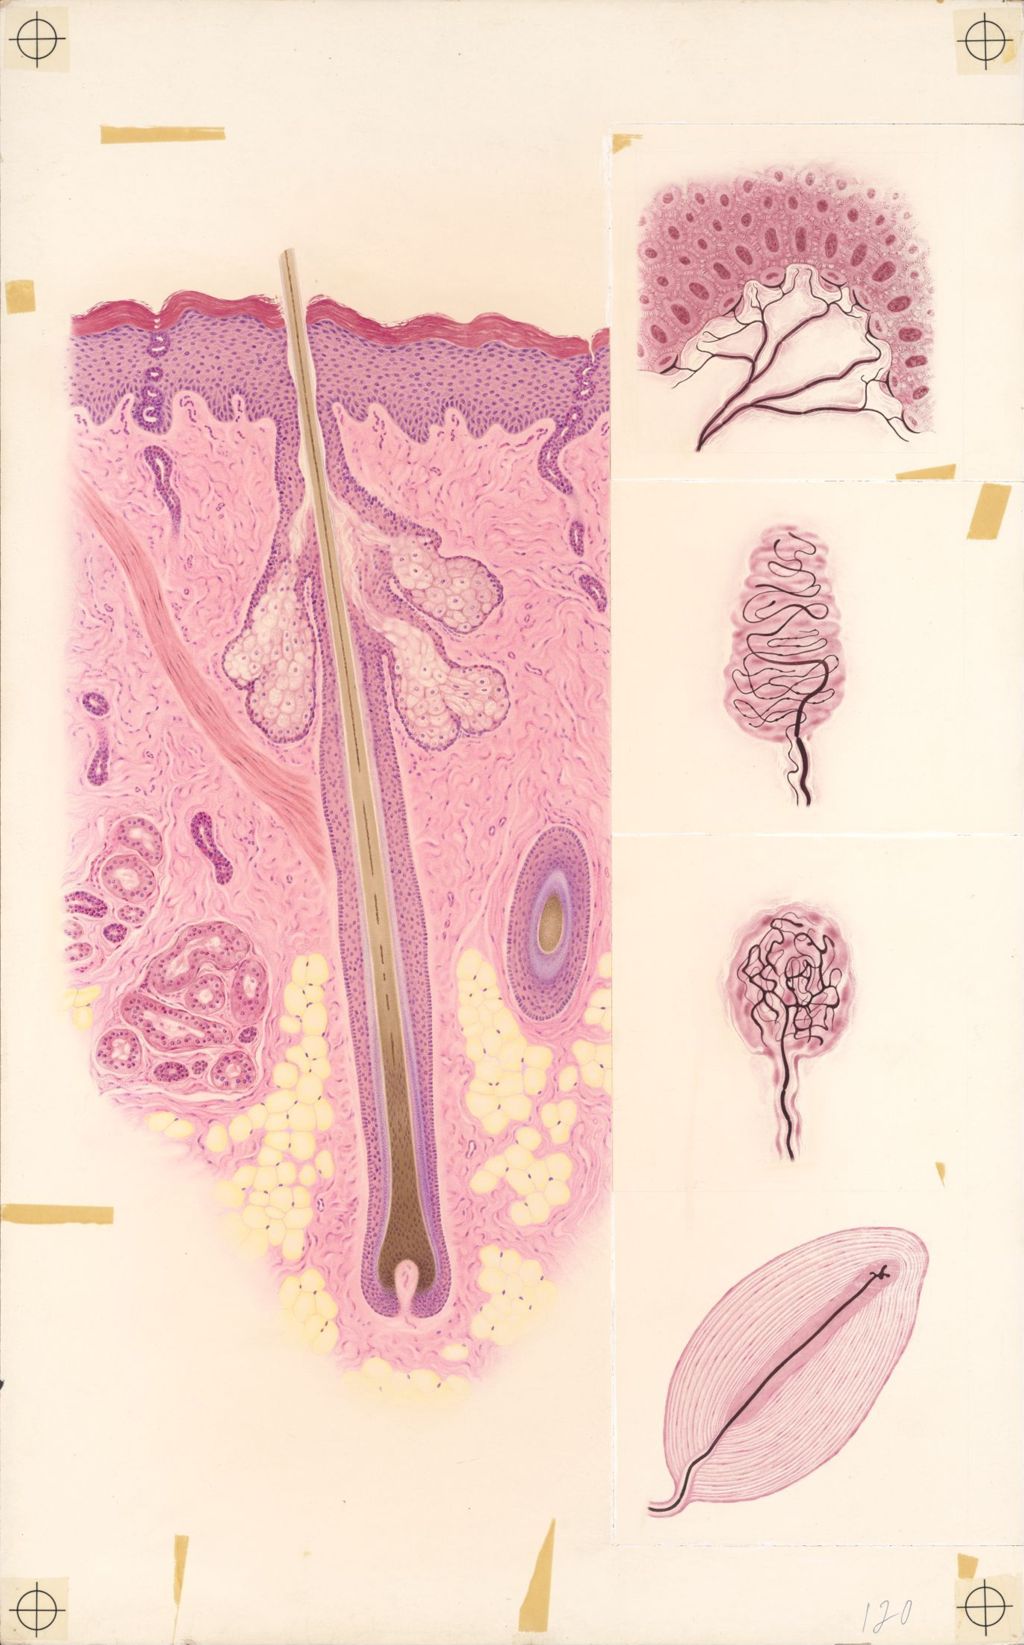 Plate II, Schematic Representations of Microscopic Structures of the Skin, Vertical Section of Skin Showing a Hair Follicle and Adjacent Structures